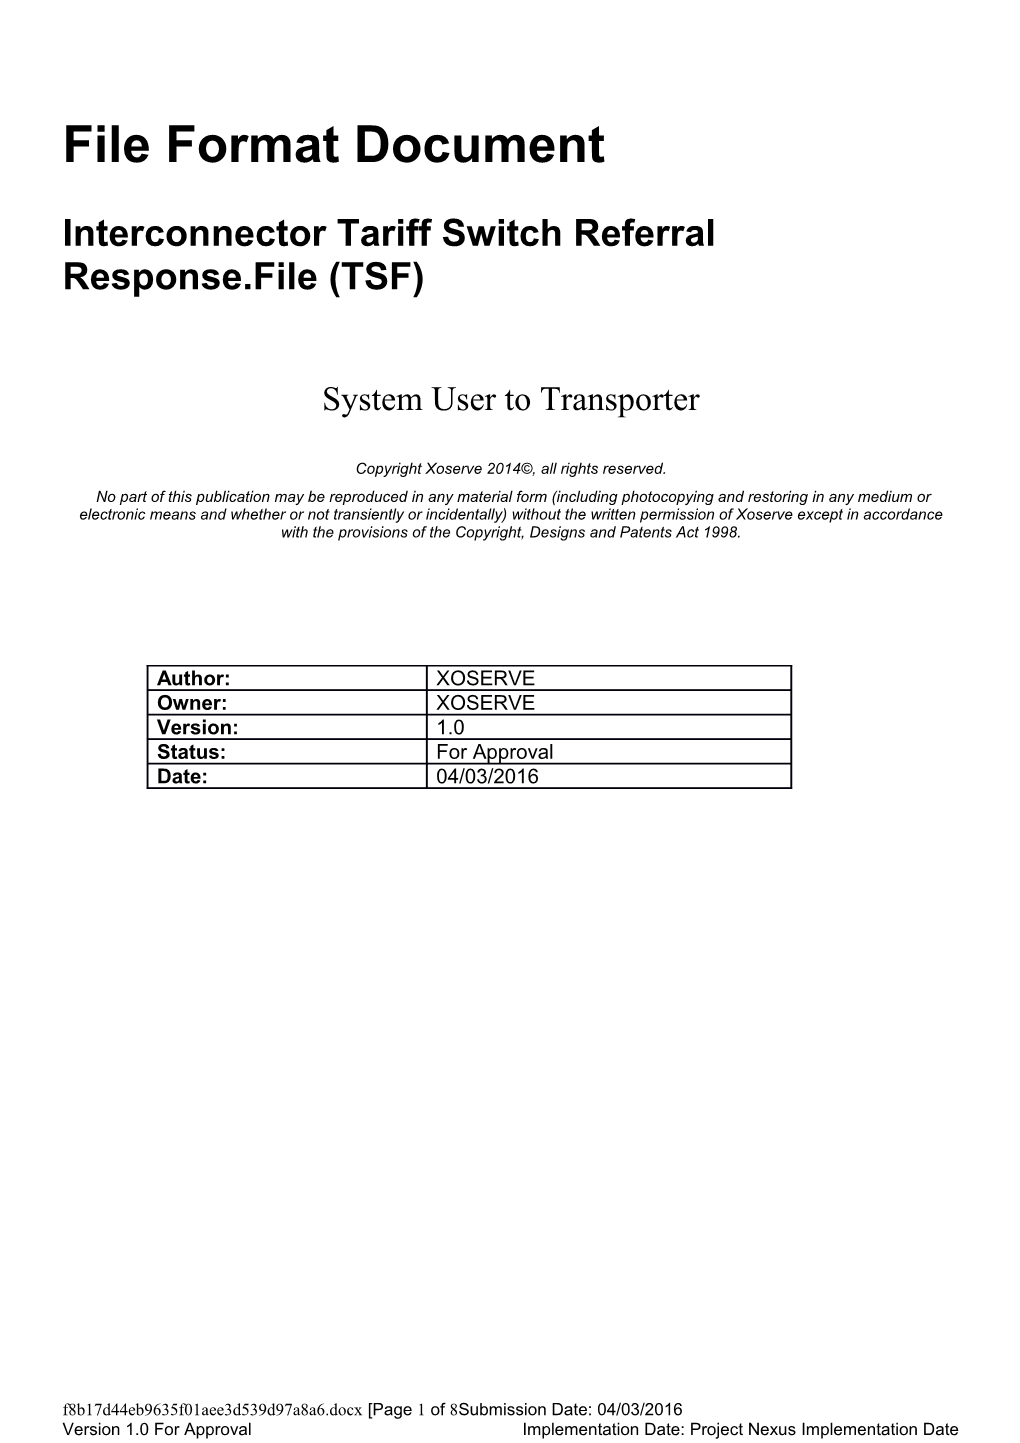 Interconnector Tariff Switch Referral Response.File (TSF)